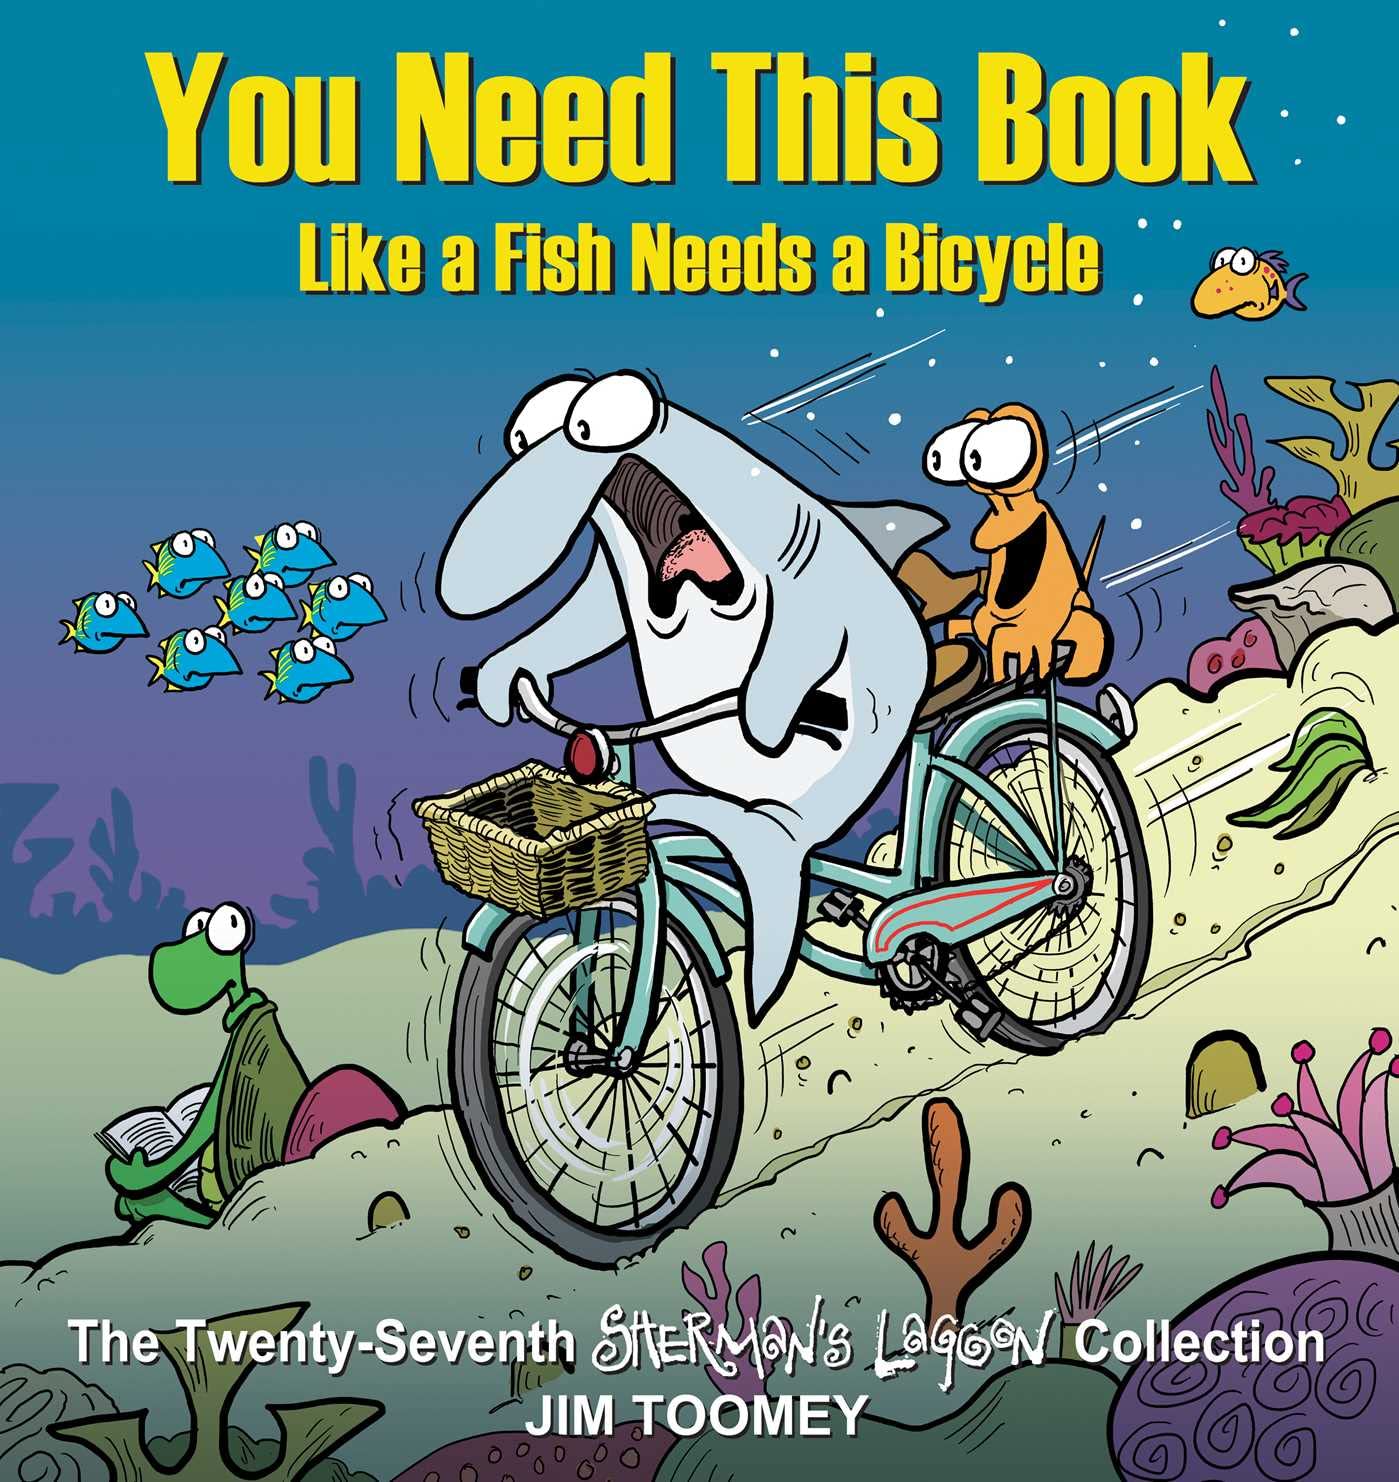 You Need This Book Like a Fish Needs a Bicycle (Volume 27) (Sherman's Lagoon)